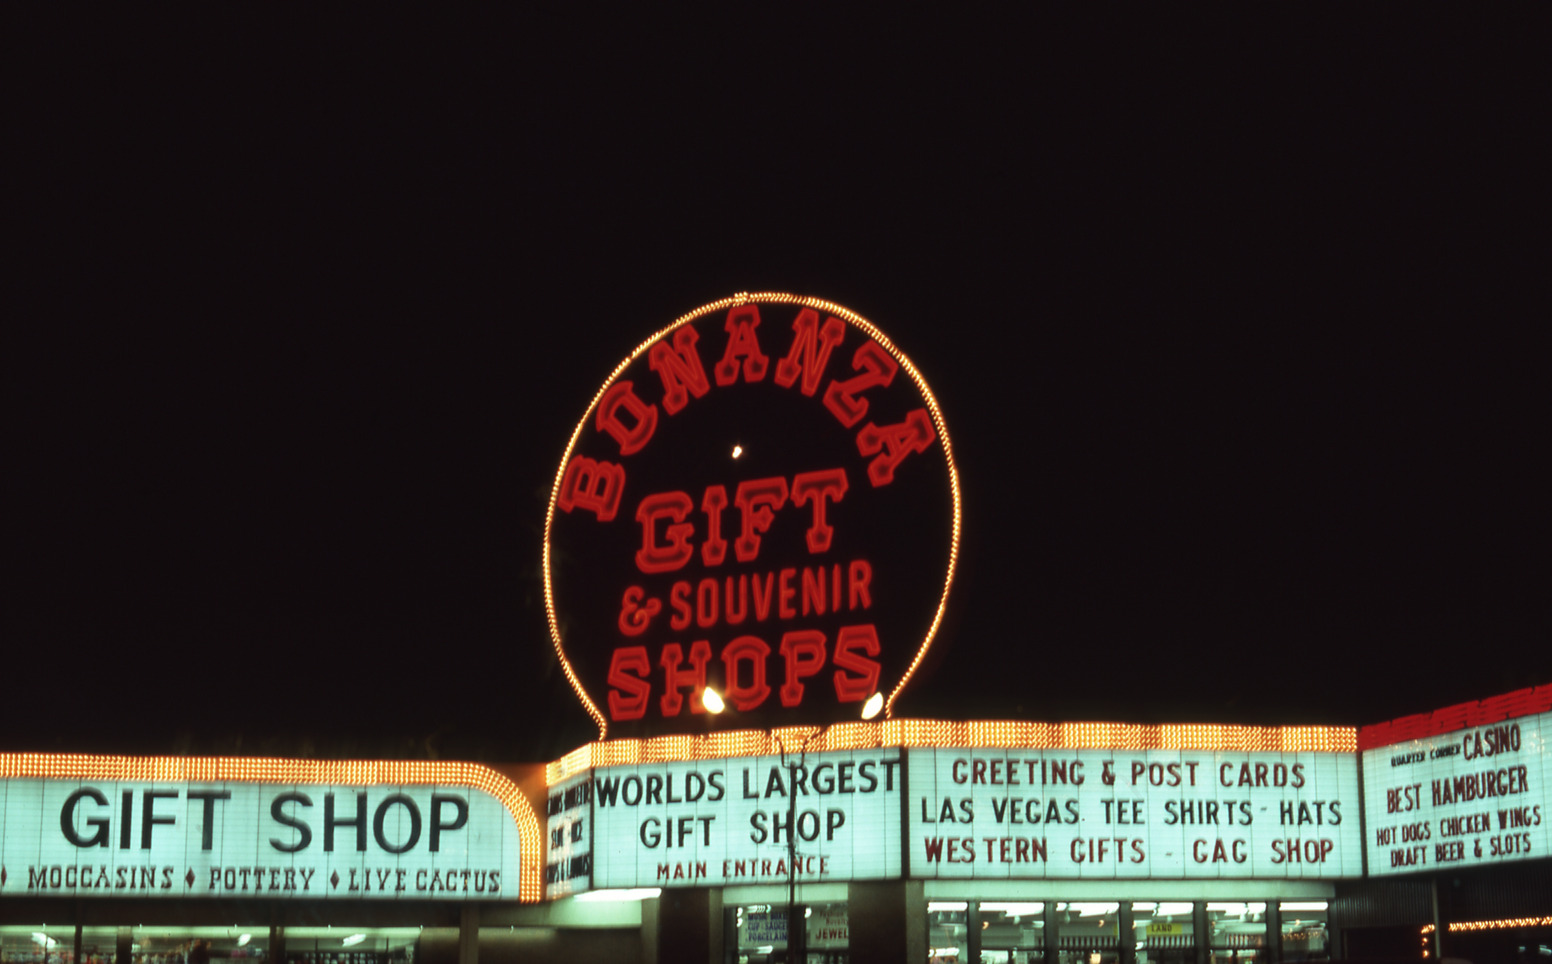 Bonanza Gift Shop marquee, roof mounted, and wall signs, Las Vegas, Nevada: photographic print